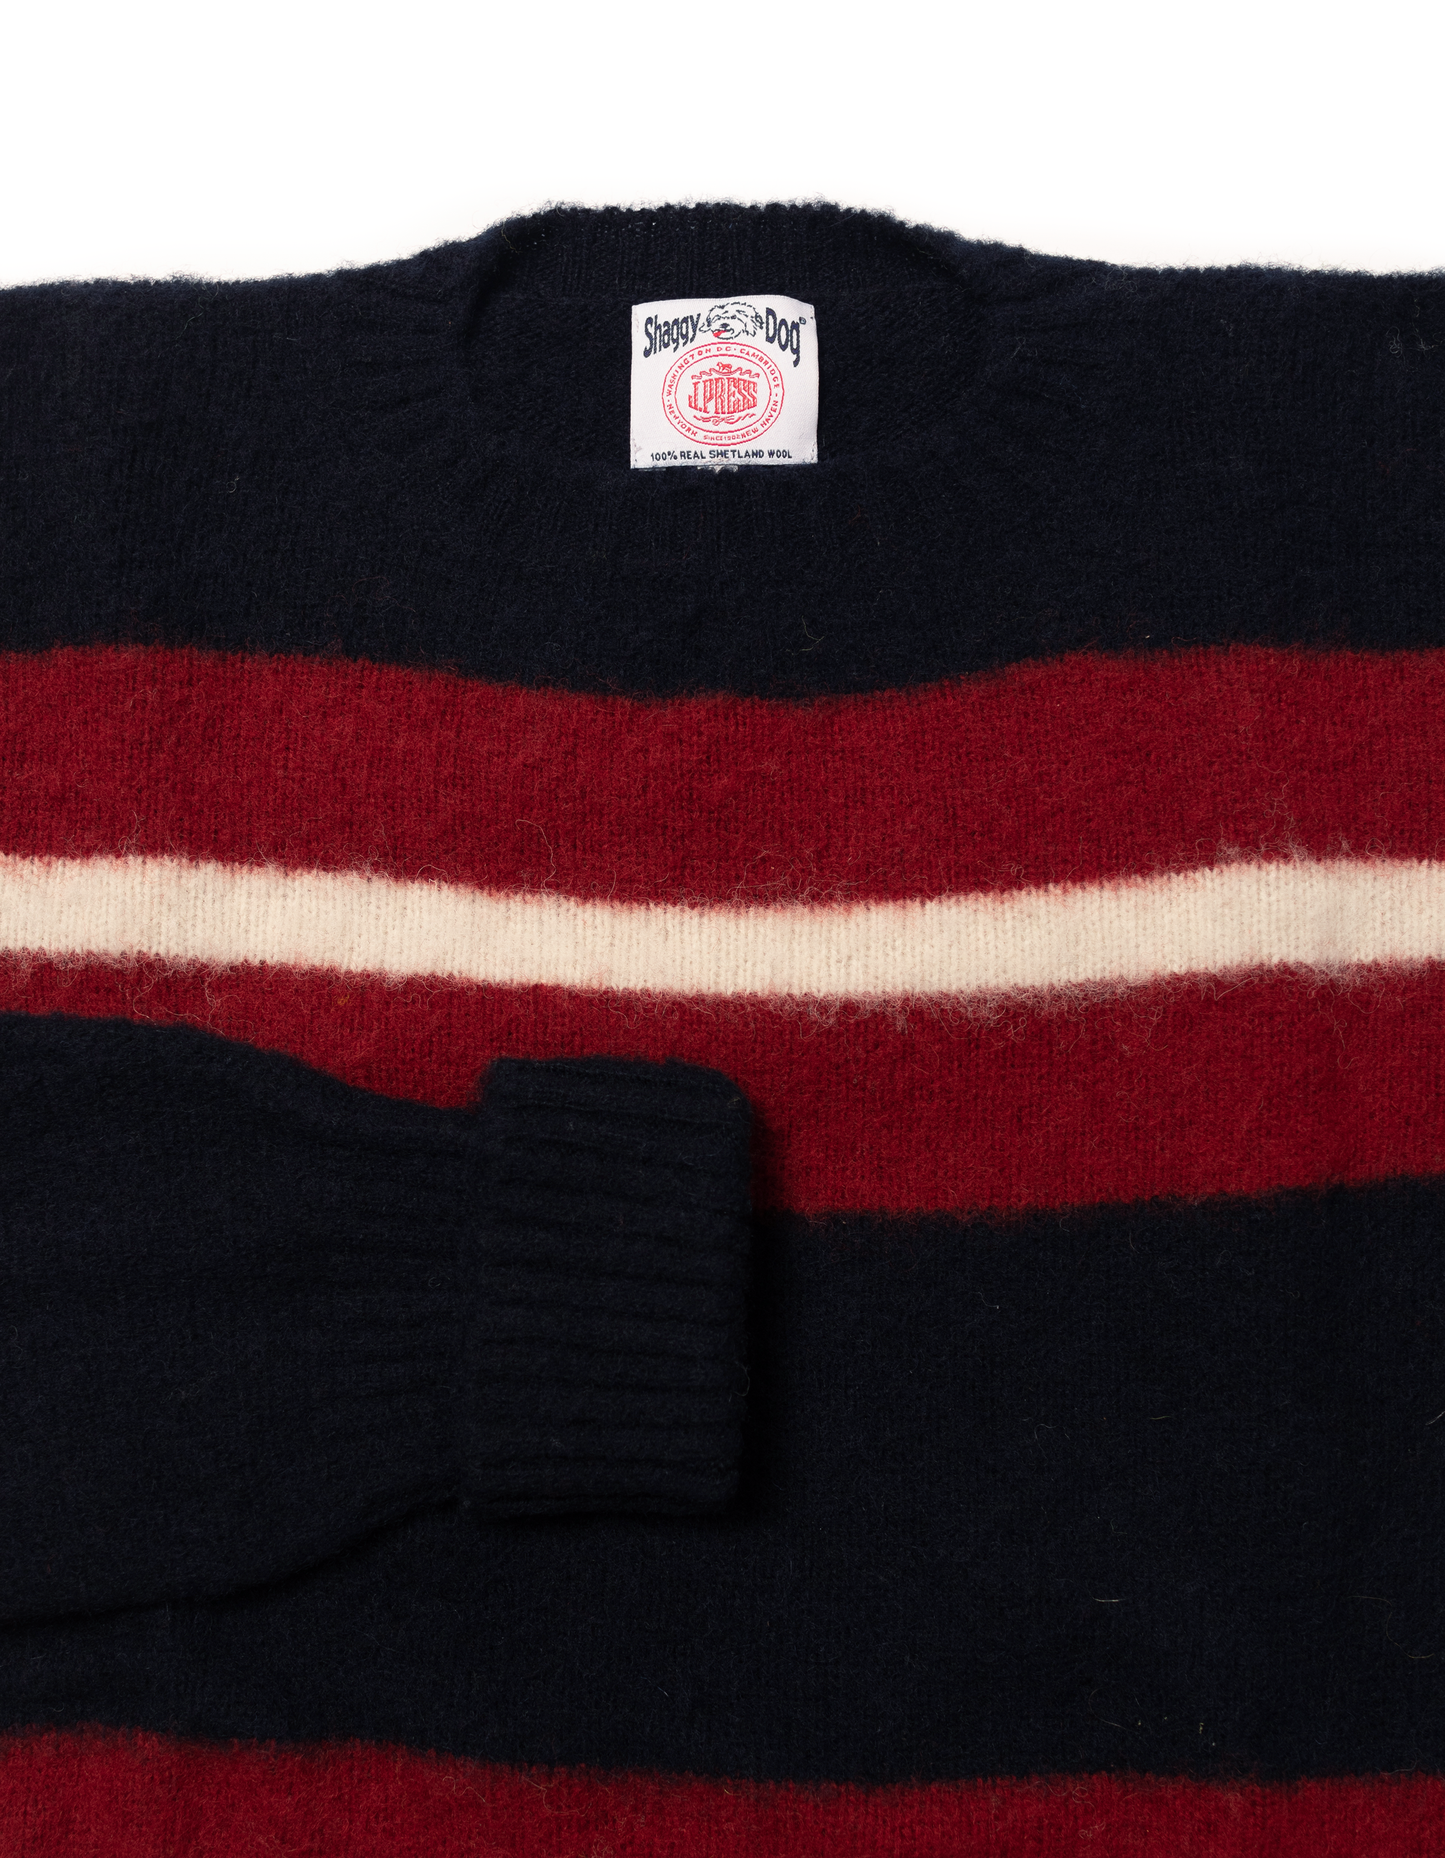 SHAGGY DOG STRIPE SWEATER NAVY/WHITE/RED - CLASSIC FIT